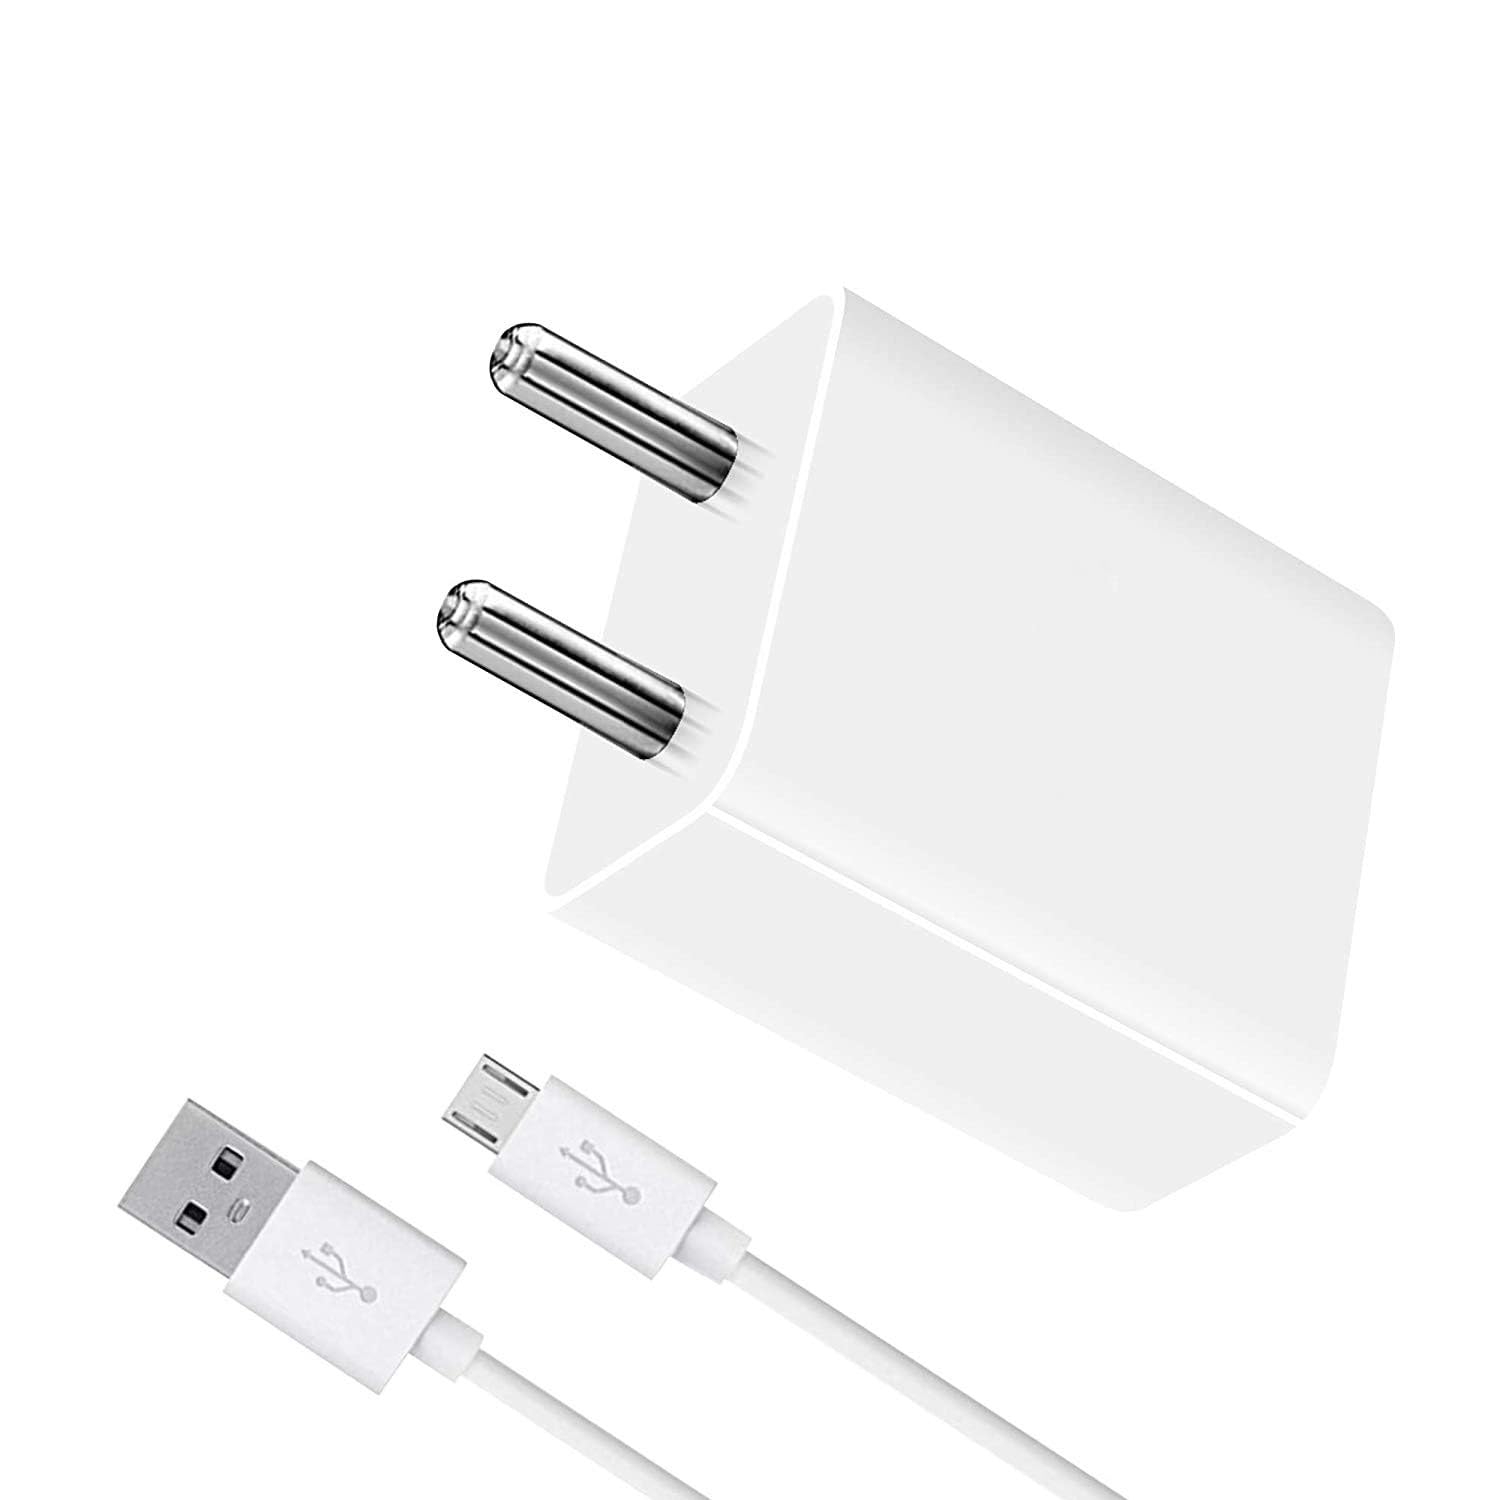 50W PG4 Ultra Fast Charger for iVooMi i1S Charger Original Adapter Like Mobile Charger | Qualcomm QC 3.0 Quick Charge Adaptive Charger with 1 Meter Micro USB Data Cable (50W, M, White)